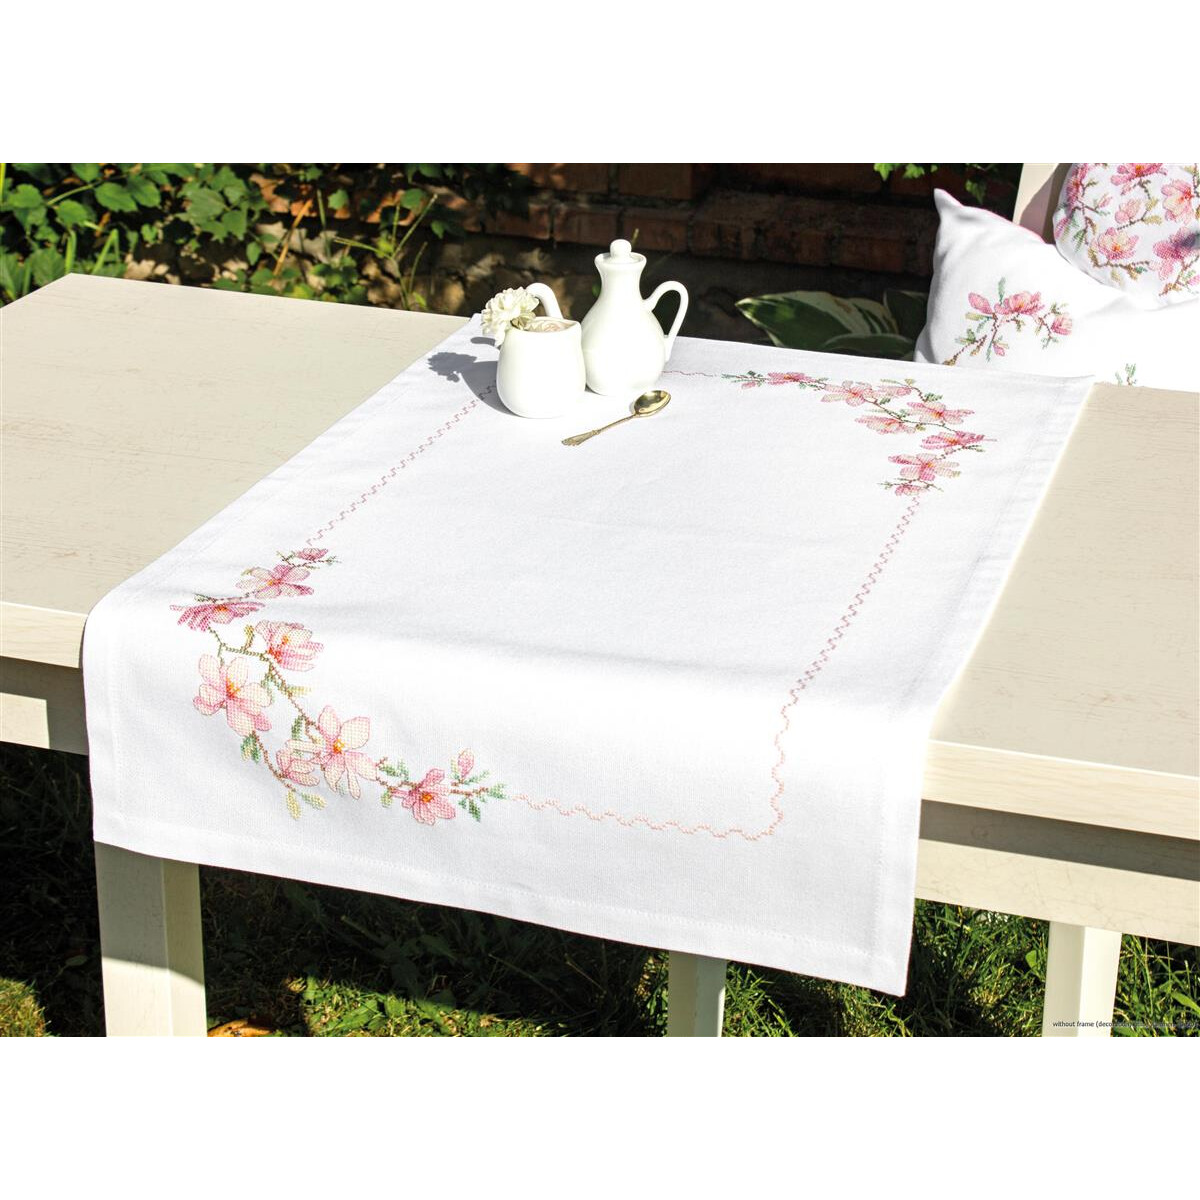 A white table, decorated with an embroidered table runner...